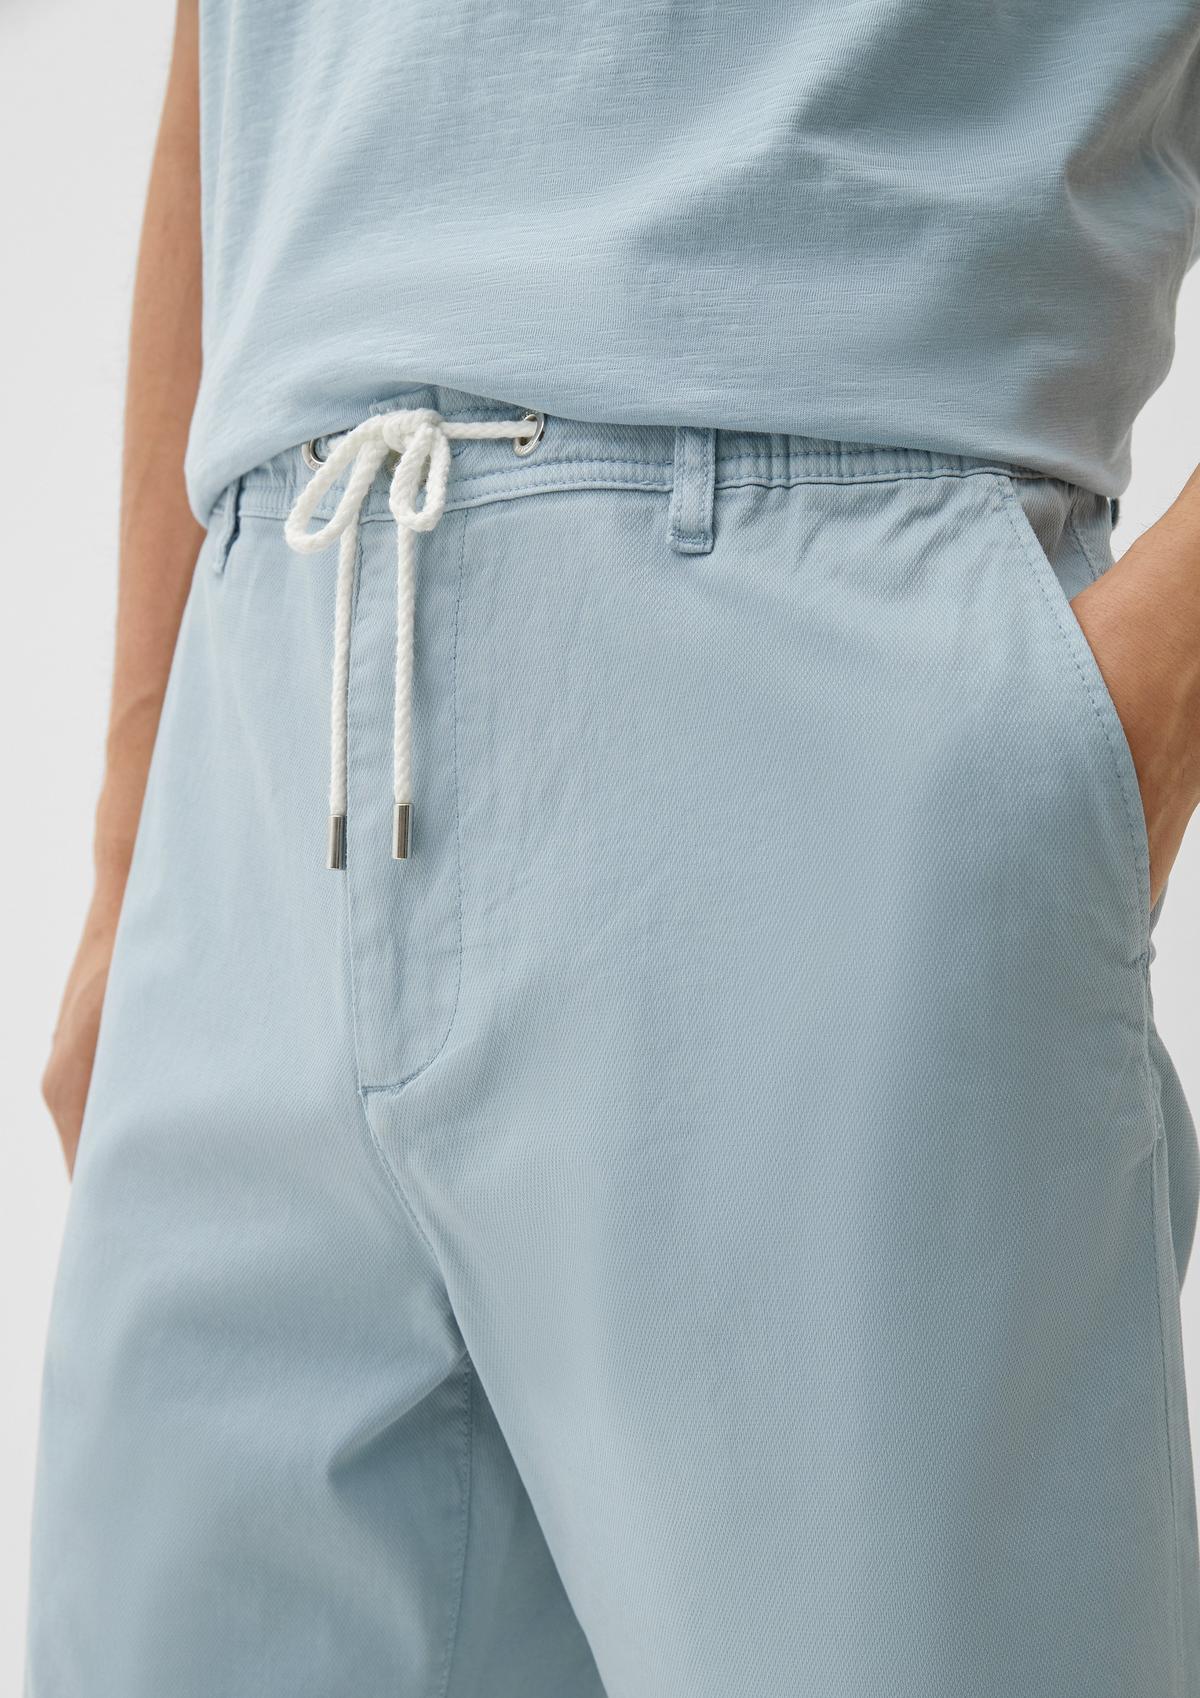 Relaxed fit: Bermuda shorts drawstring - with rose